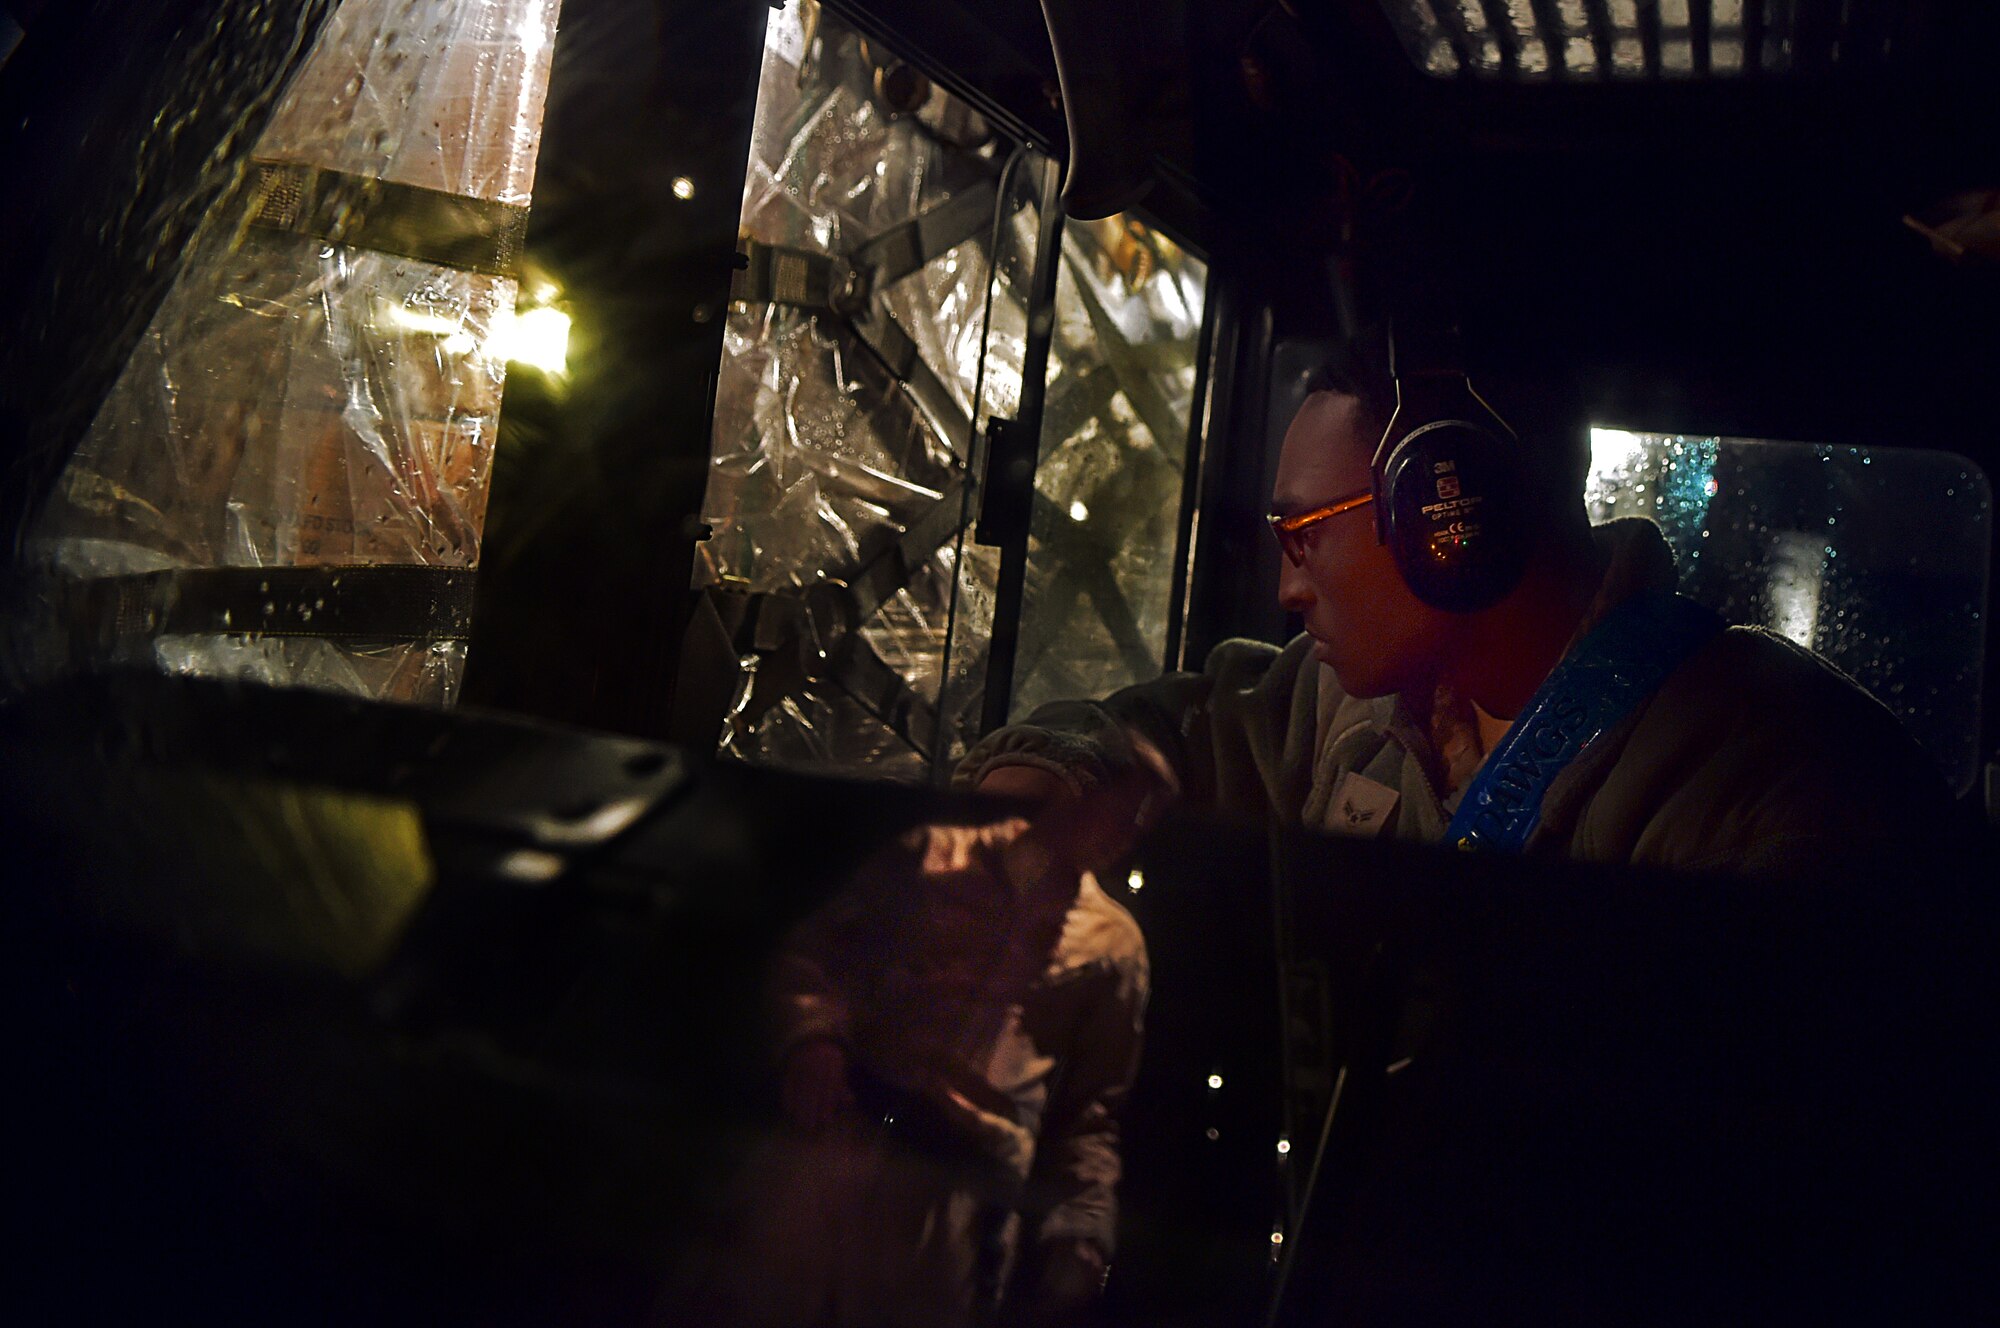 Airman 1st Class Michael Taylor, an air transporter with the 721st Aerial Port Squadron, assists Senior Airman Christian McDevitt, load master with the 37th Airlift Squadron, in loading cargo onto a C-130-J Super Hercules prior to a mission in support of the Ebola virus epidemic, Oct. 7, 2014, at Ramstein Air Base, Germany. As the Ebola outbreak becomes a potential global threat, U.S. Africa Command is working in support of the U.S. Agency for International Development, the lead federal agency (LFA), as part of a comprehensive U.S. Government effort to respond to and contain the outbreak of the Ebola virus in West Africa as quickly as possible.  This was the first C-130J Super Hercules flight launched from Ramstein to Monrovia, Liberia in support of Operation UNITED ASSISTANCE. (U.S. Air Force photo by/Staff Sgt. Sara Keller